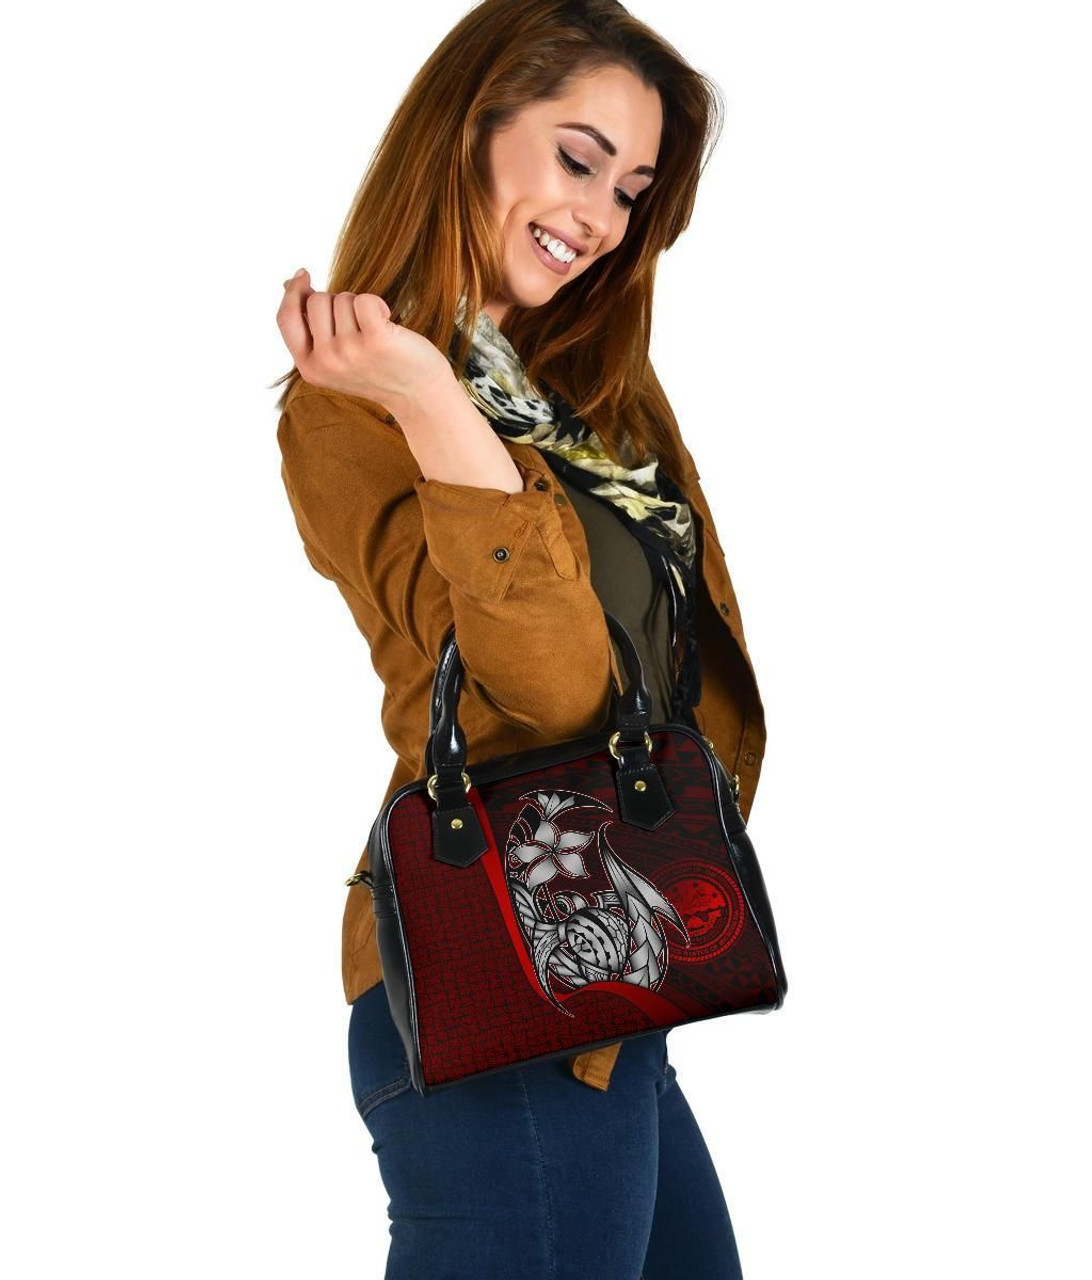 Federated States Of Micronesia Shoulder Handbag Red - Turtle With Hook 2